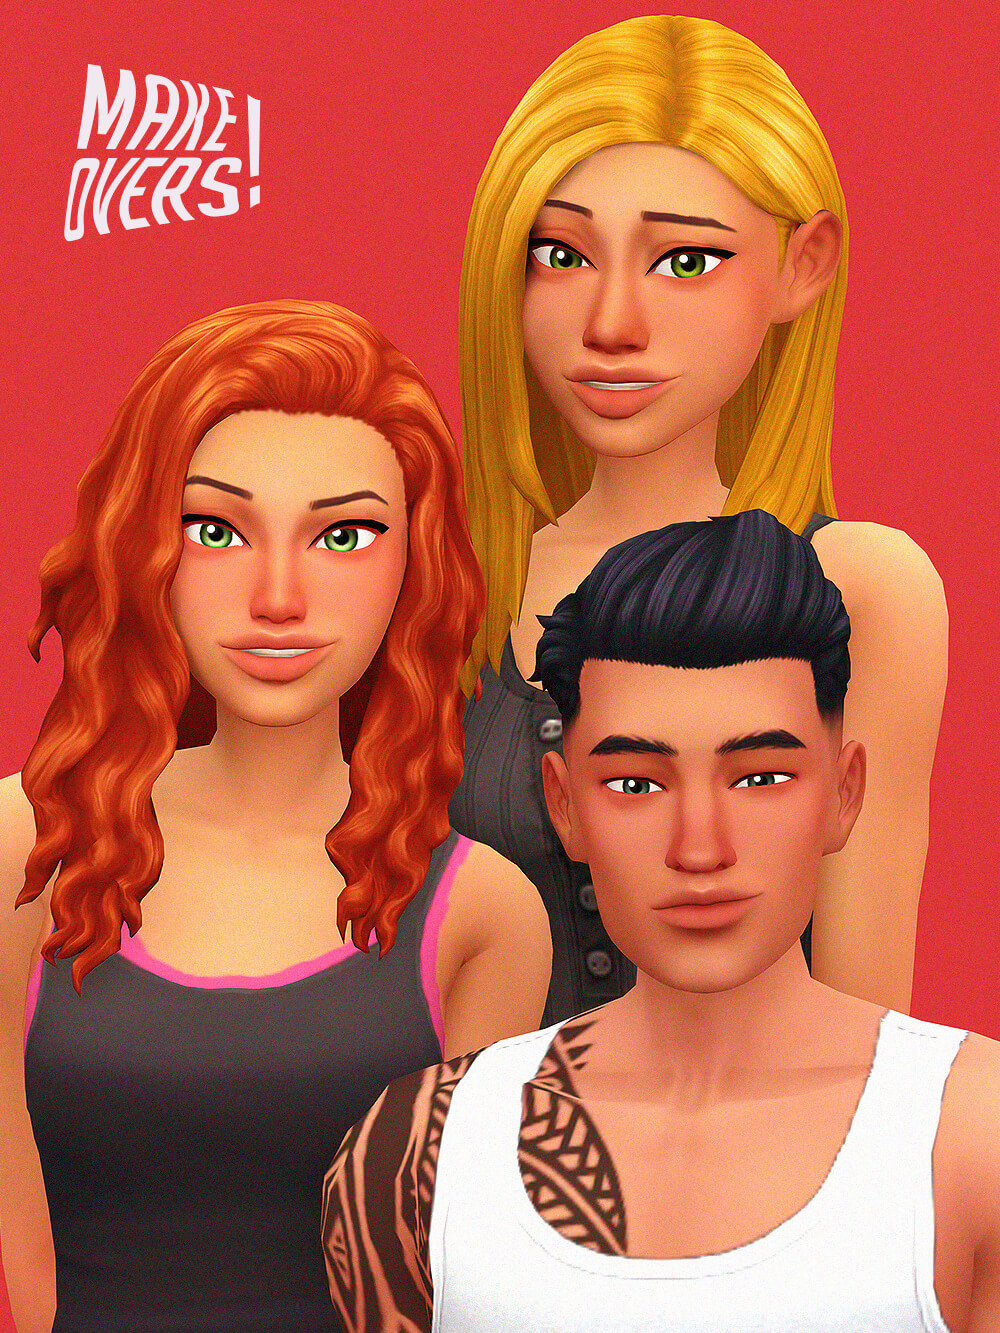 Sims 4 Caliente Sisters Don Lothario By Marso Sims Best Sims Mods